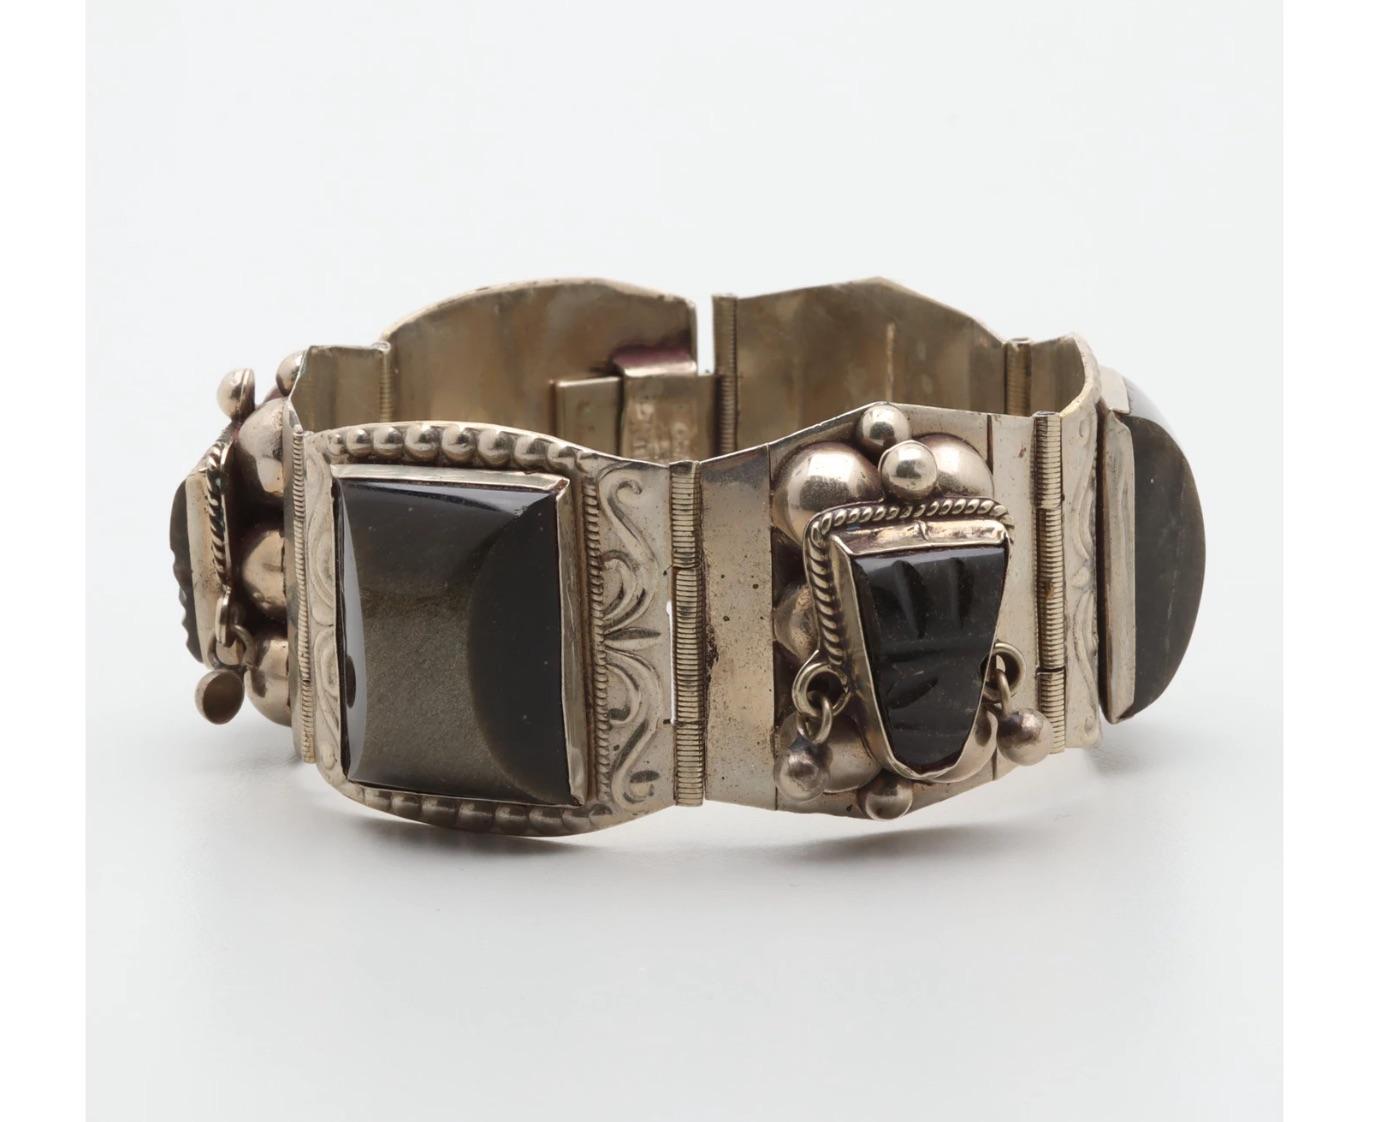 An attractive Sterling Silver Vintage 1950s Cuff Bracelet set with Carved and Rectangular Obsidian Cabochons alternating with Carved Obsidian Aztec Masks to embossed designs and round sterling silver beads and accented links.

Hallmarked-Sterling